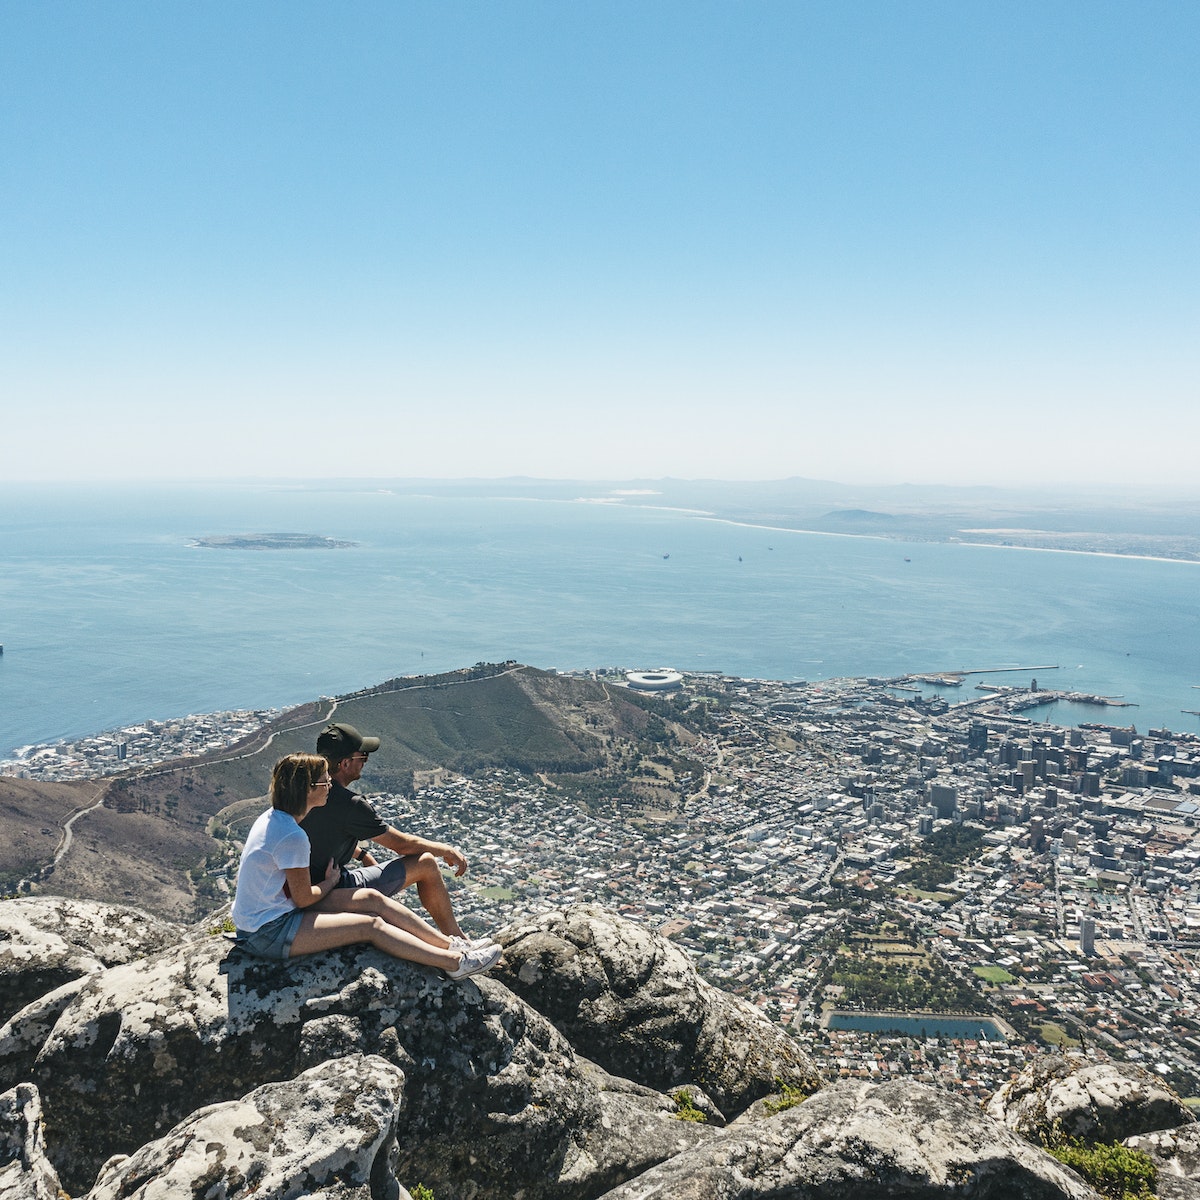 The view from table mountain is breathtaking.
1137384860
Cityscape, Color Image, Looking At View, Scenics - Nature, Capit, Capital Cities, Landscape - Scenery, Adult, Outdoors, High Angle View, Cape Peninsula, Photography, Freedom, Romance, People, High Up, Travel, Western Cape Province, Couple - Relationship, Vacations, Heterosexual Couple, On Top Of, Embracing, Adventure, Lifestyles, Cape Town, Travel Destinations, Horizontal, Tranquil Scene, Getting Away From It All, Two People, Hiking, 40-49 Years, Adults Only, Table Mountain South Africa, Viewpoint, Mountain, Table Mountain National Park, Relaxation, Tourist, Copy Space, Summer, South Africa, Togetherness